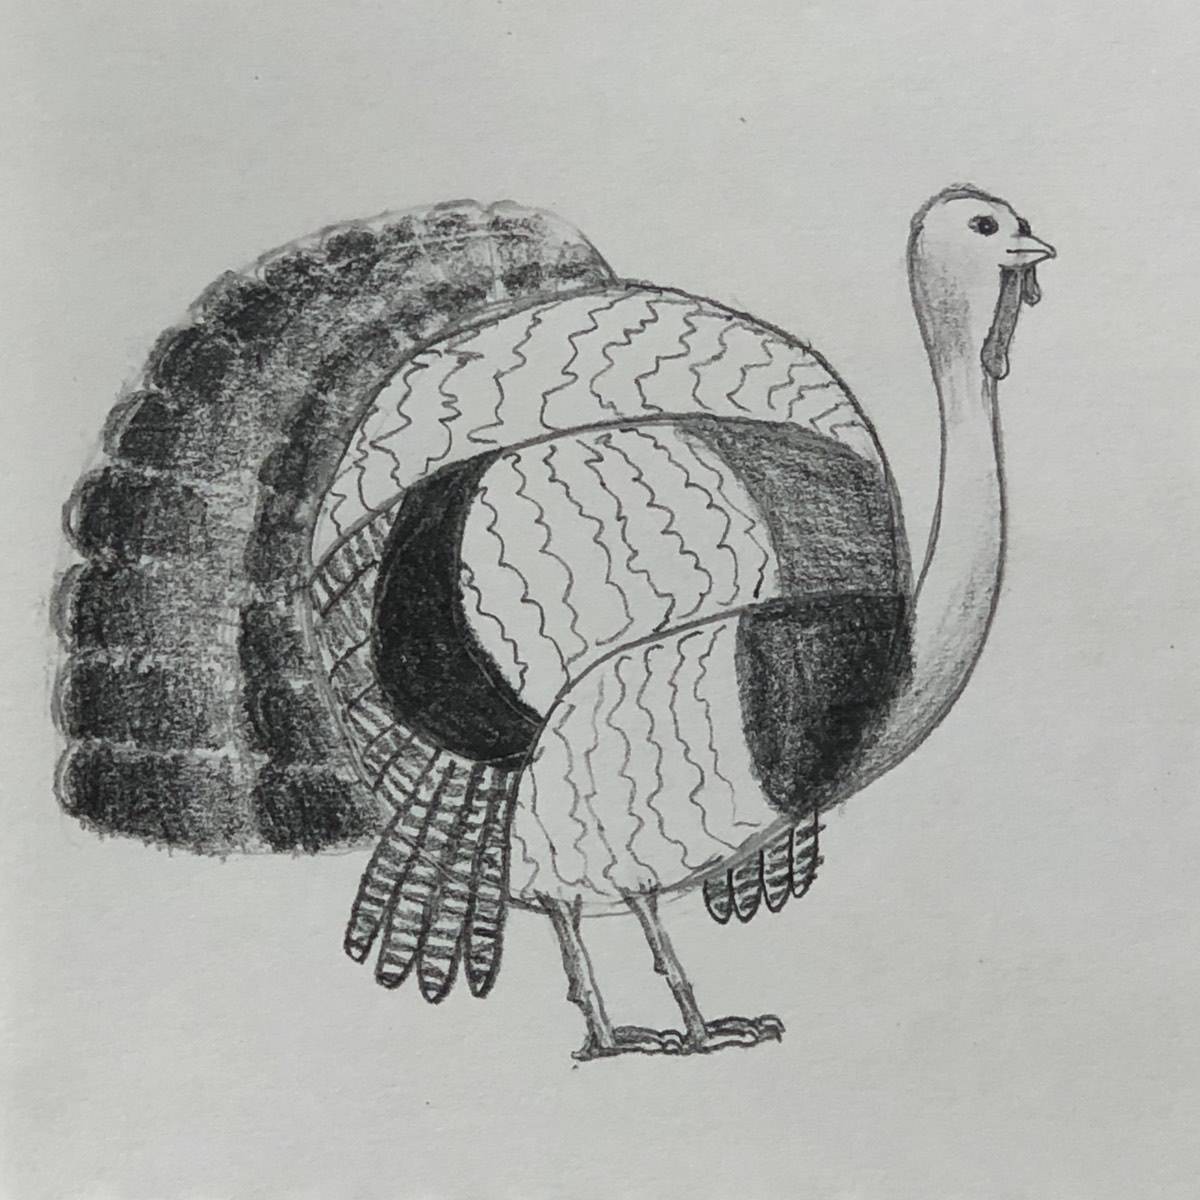 Sketch of a turkey with feather patterns added to the different body sections.